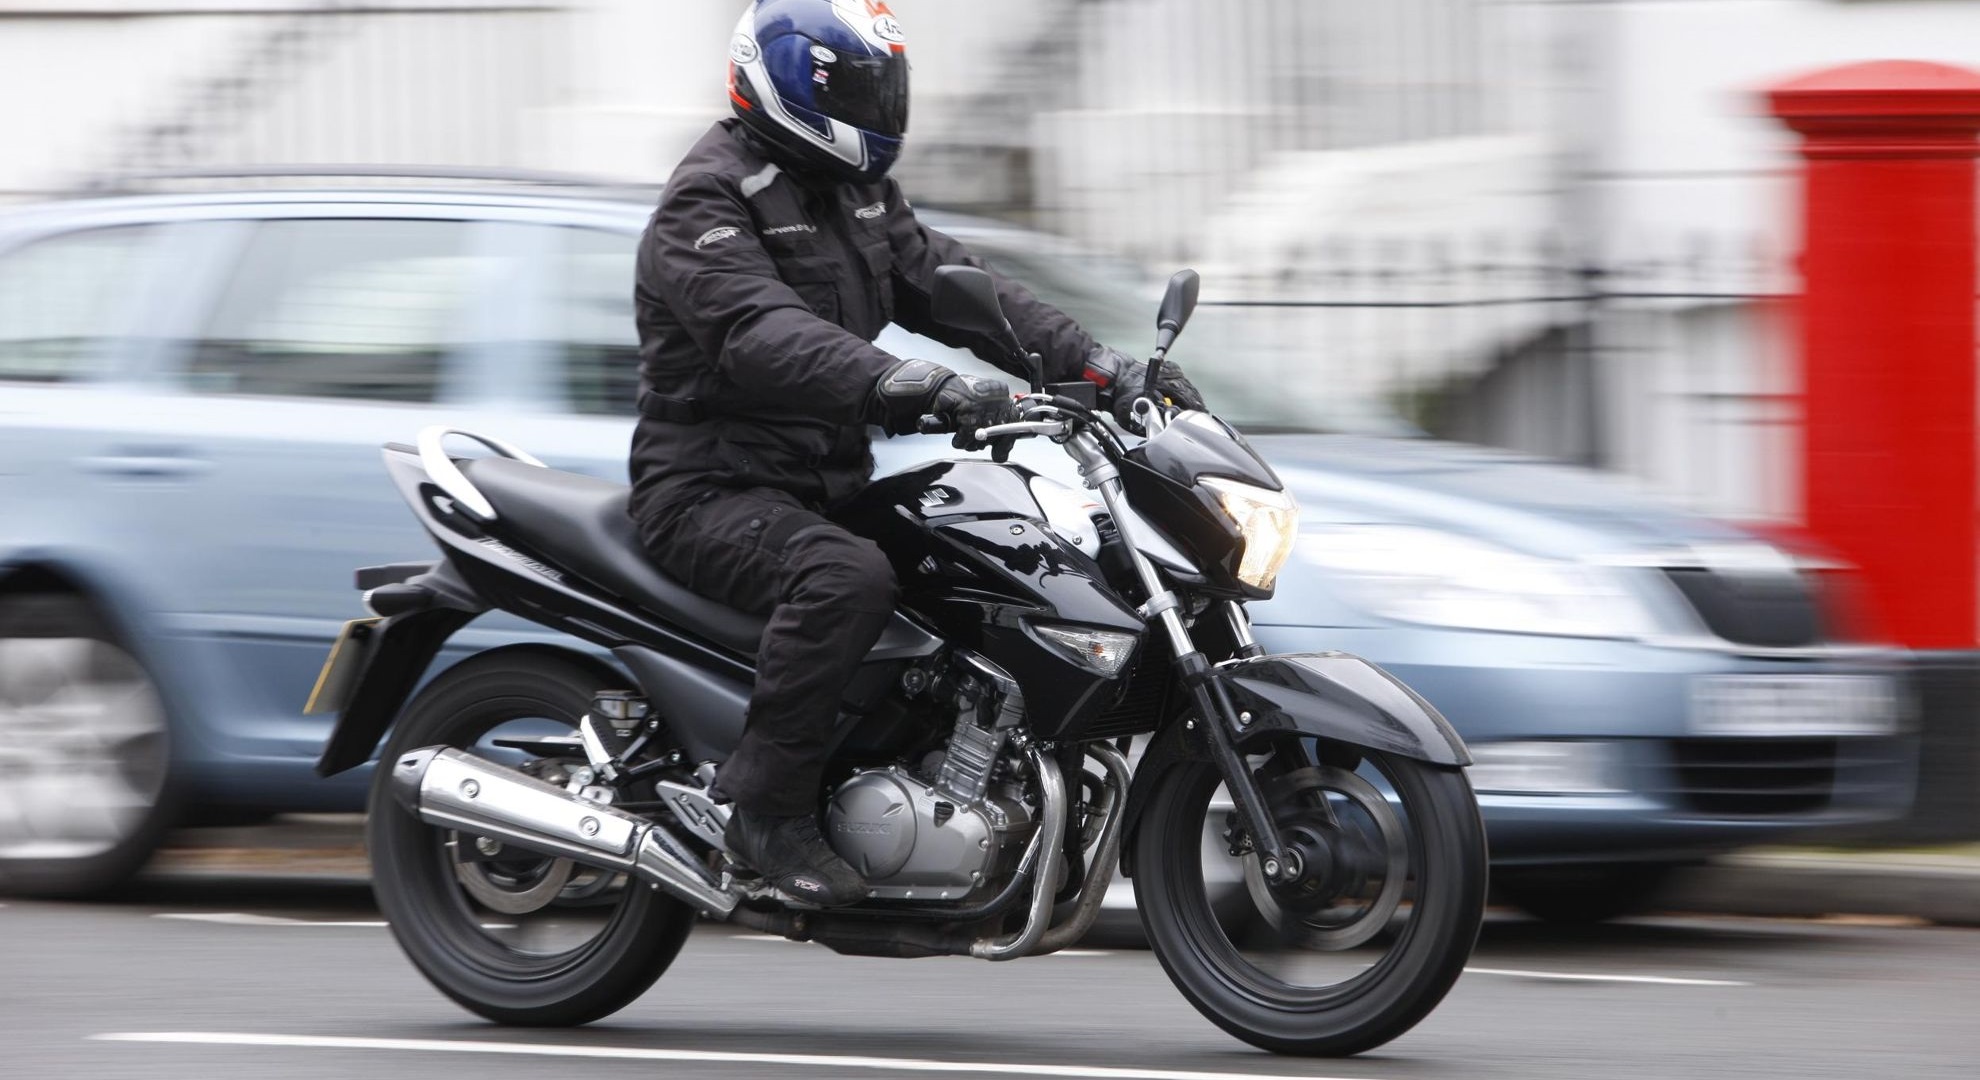 The Best Commuter Motorcycle - Top 8 Picks!